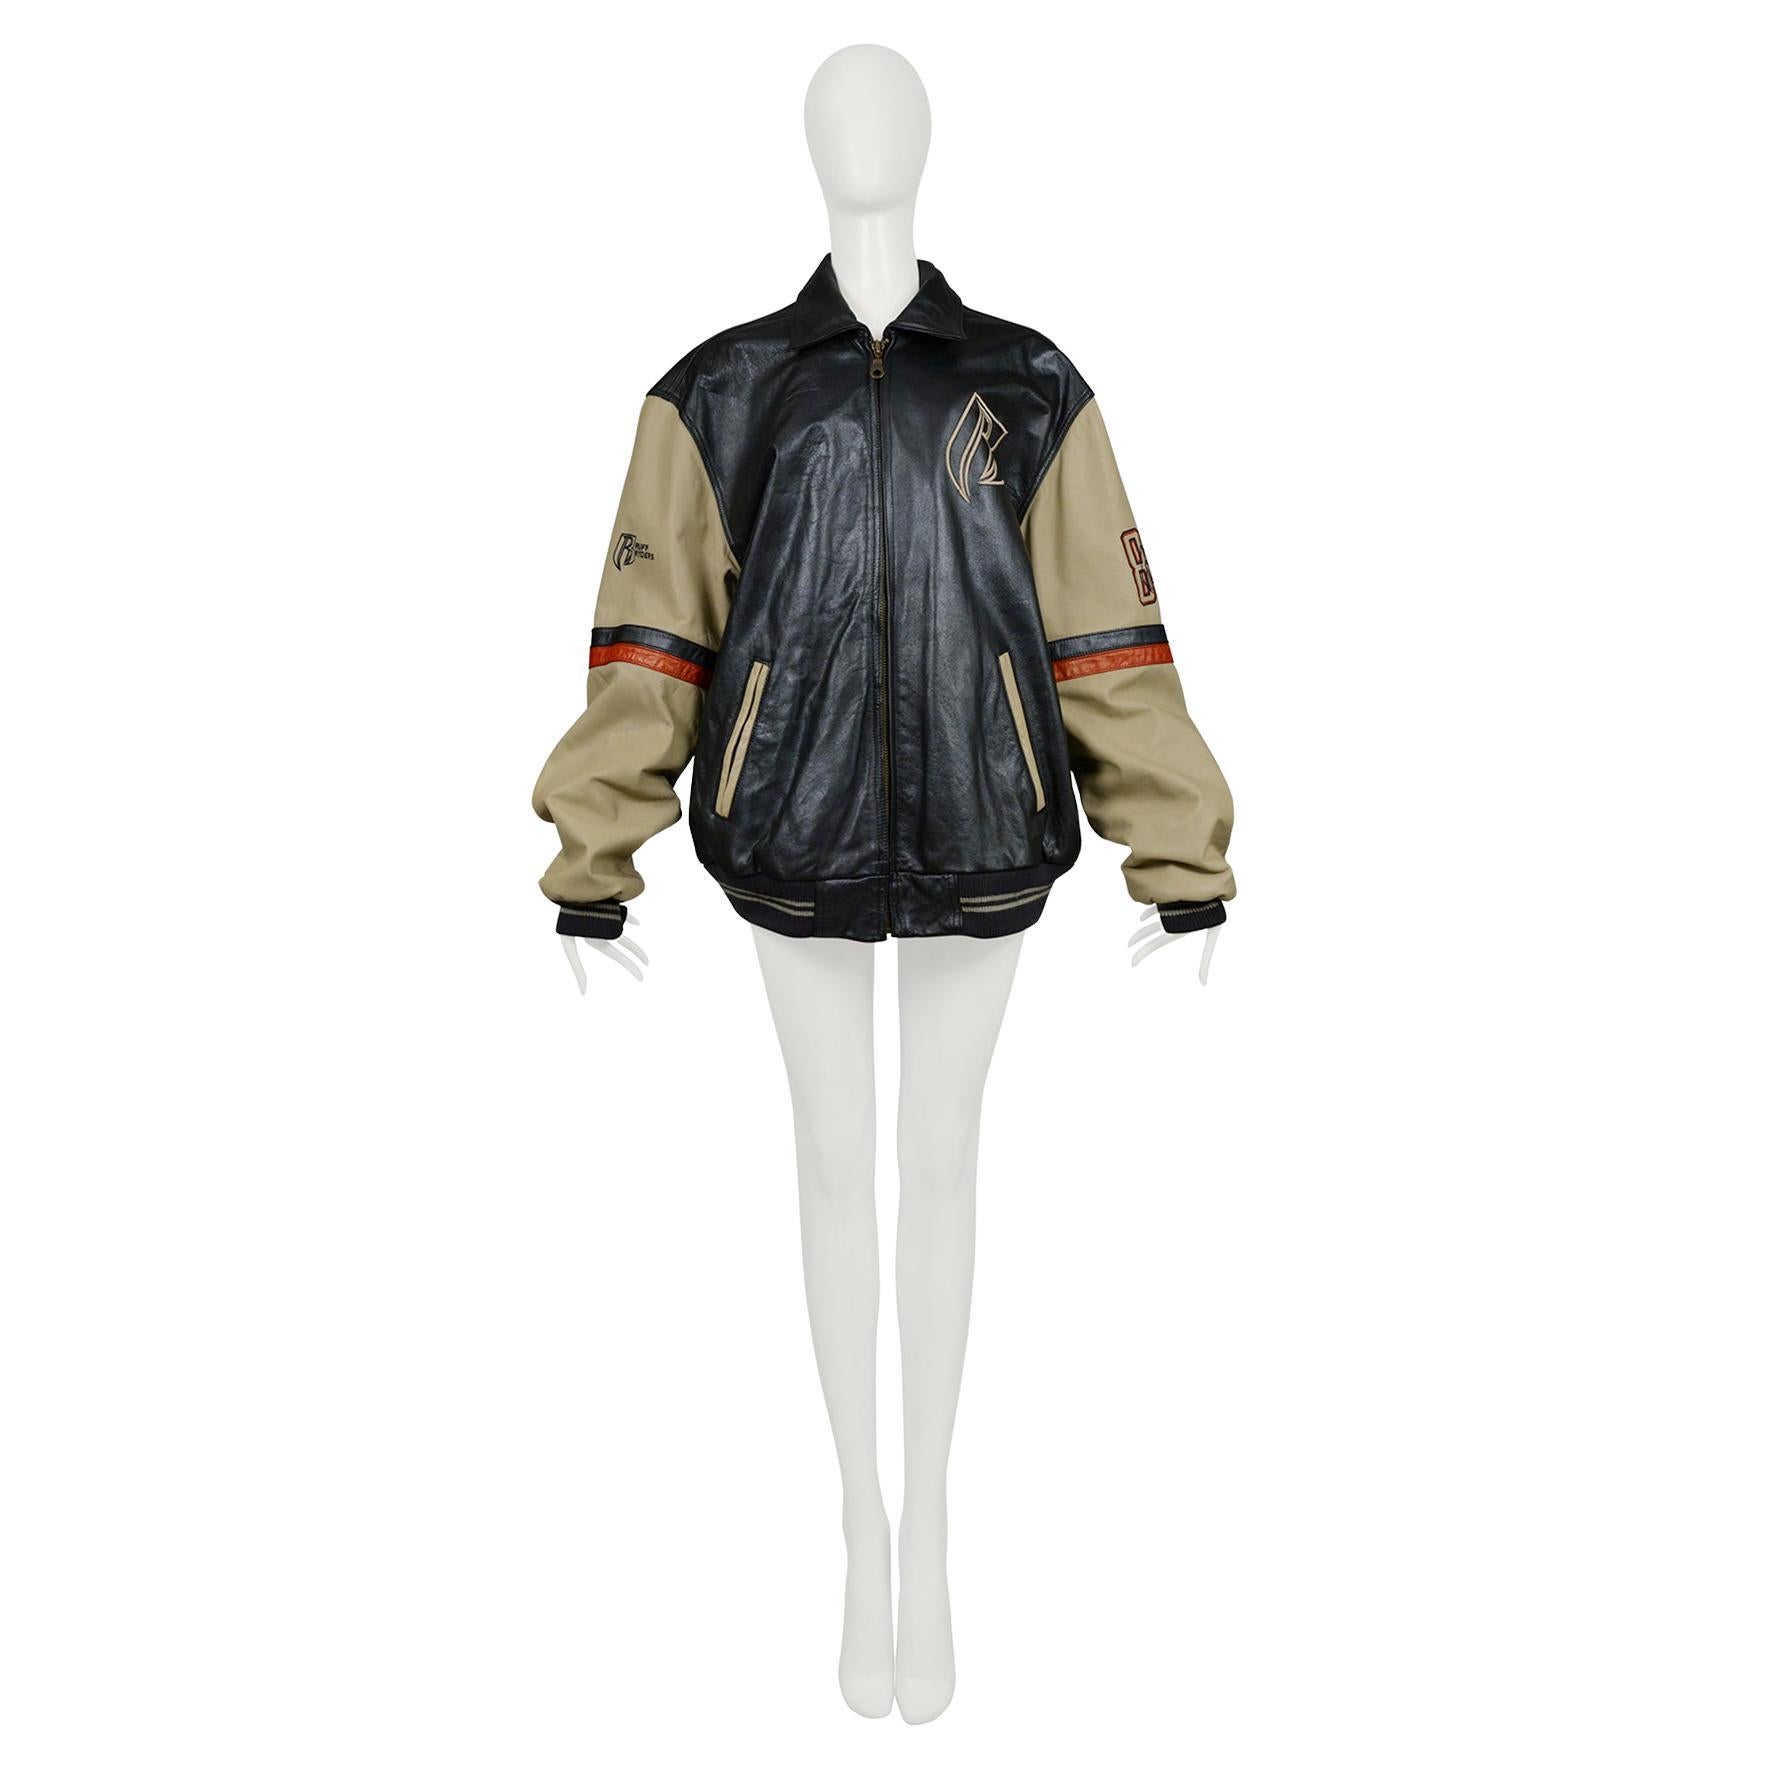 Ruff Ryders Unisex Leather Bomber Jacket For Sale 1